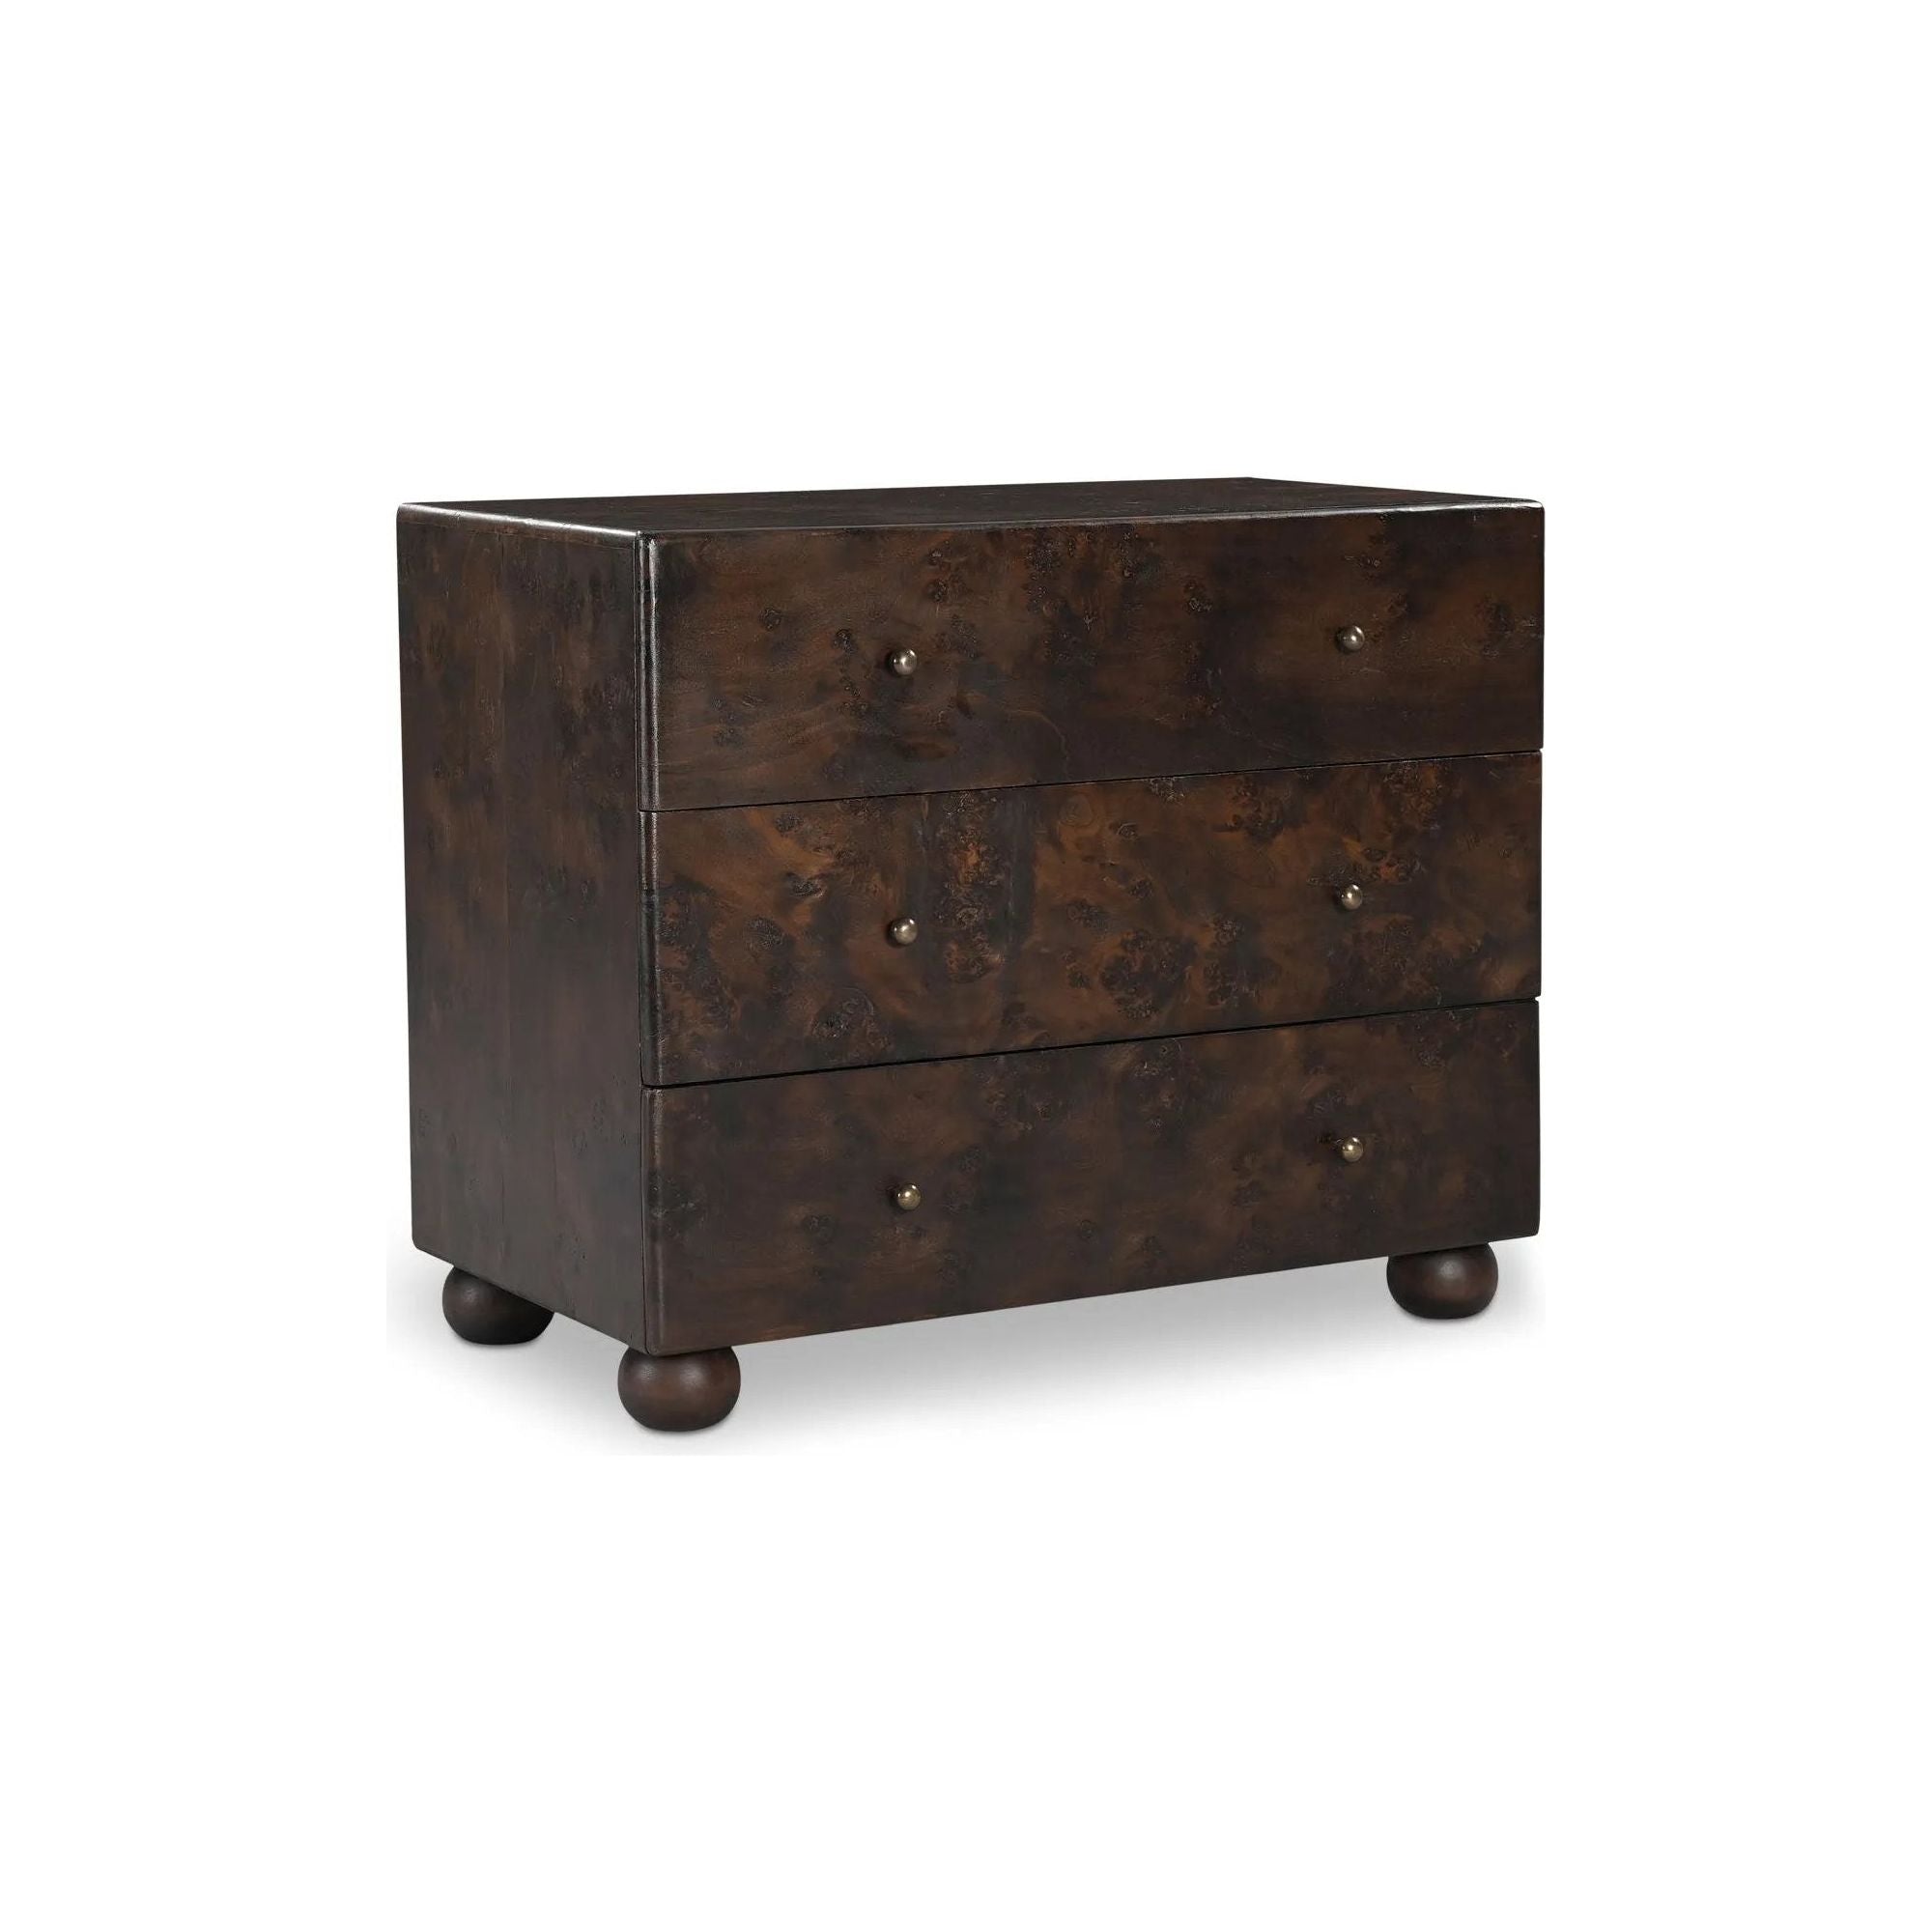 As if it tells a story woven through generations, the York 3-drawer nightstand was born from a profound respect for heritage. Amethyst Home provides interior design, new home construction design consulting, vintage area rugs, and lighting in the Houston metro area.